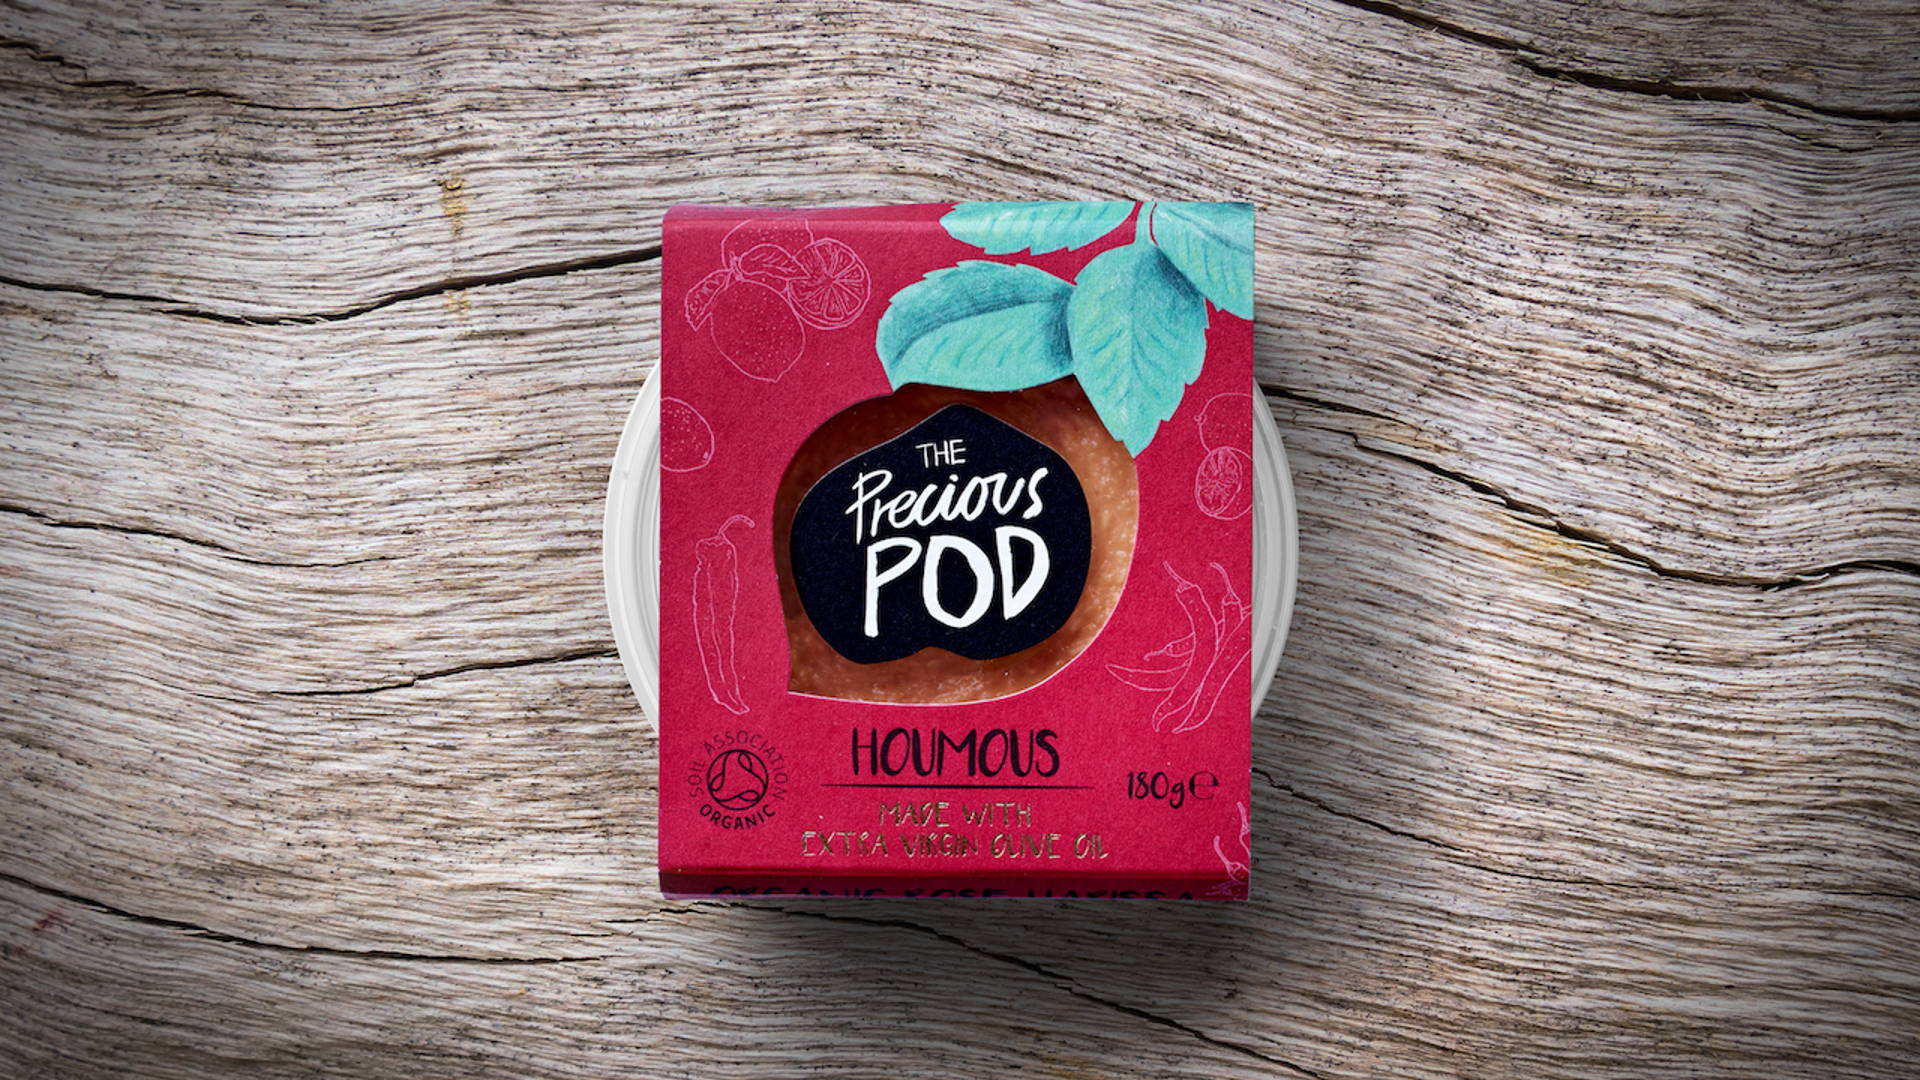 Featured image for A Packaging Redesign for The Precious Pod Makes it a Standout Hummus